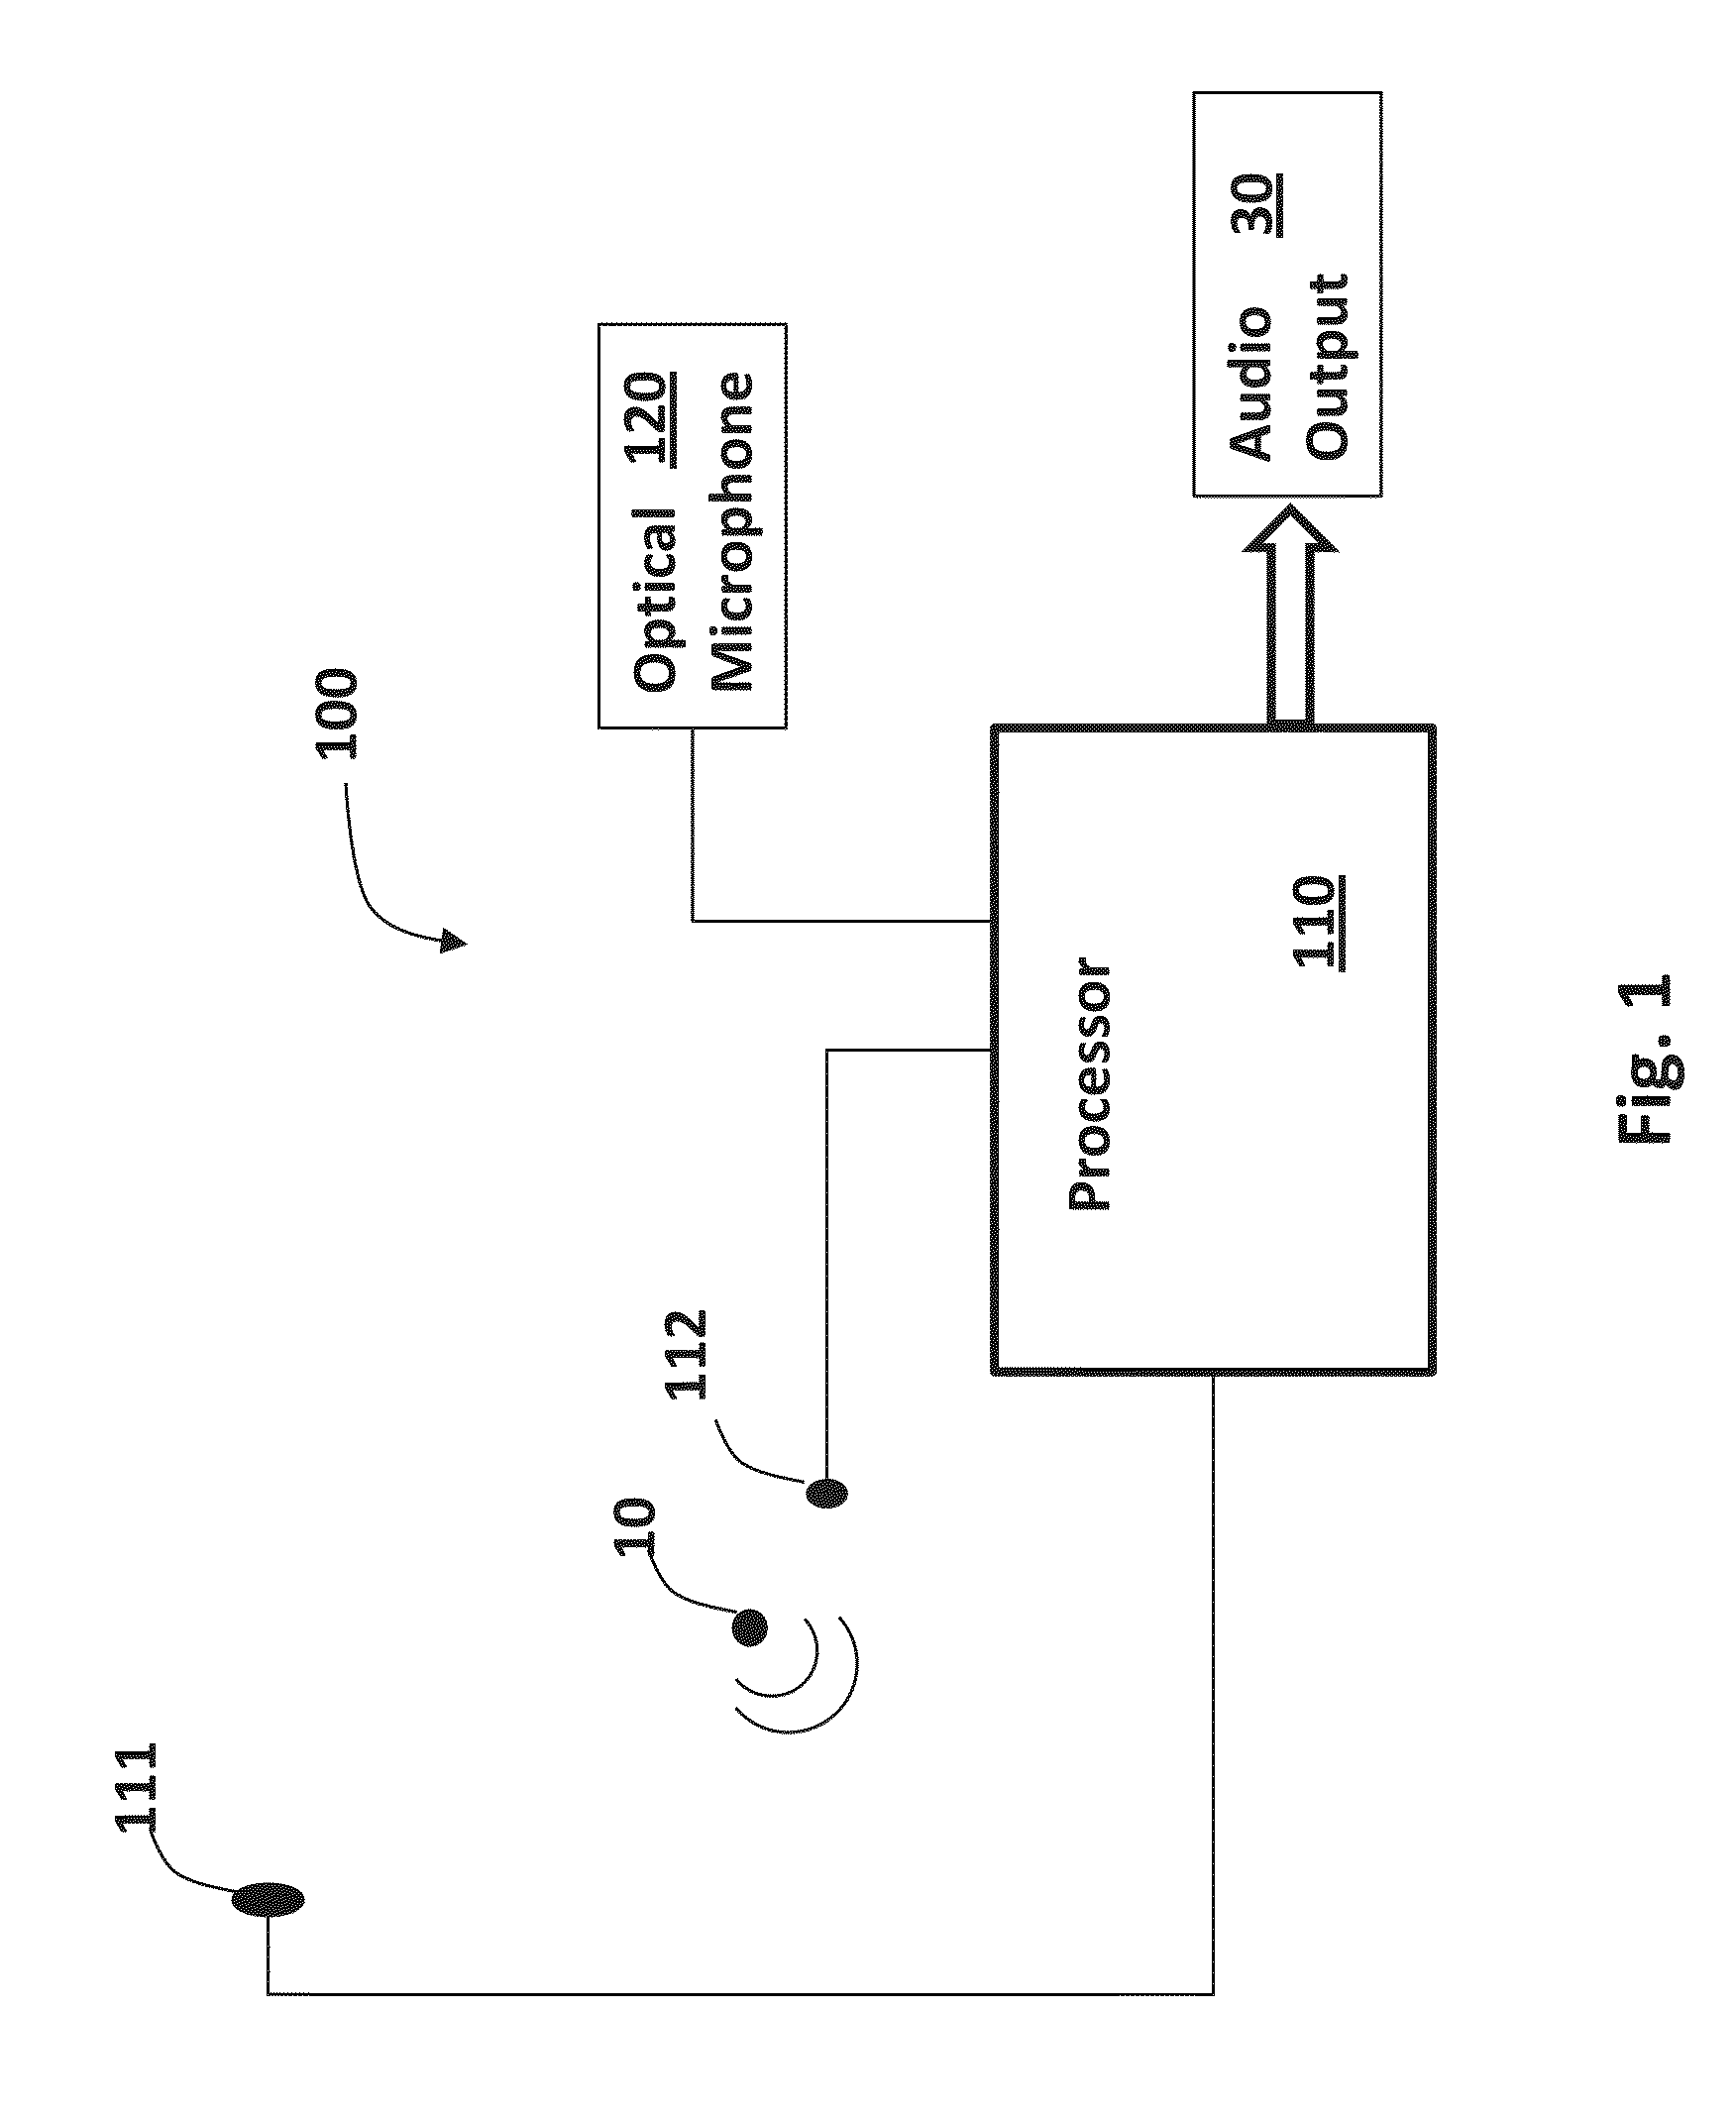 Method and system for noise reduction and speech enhancement